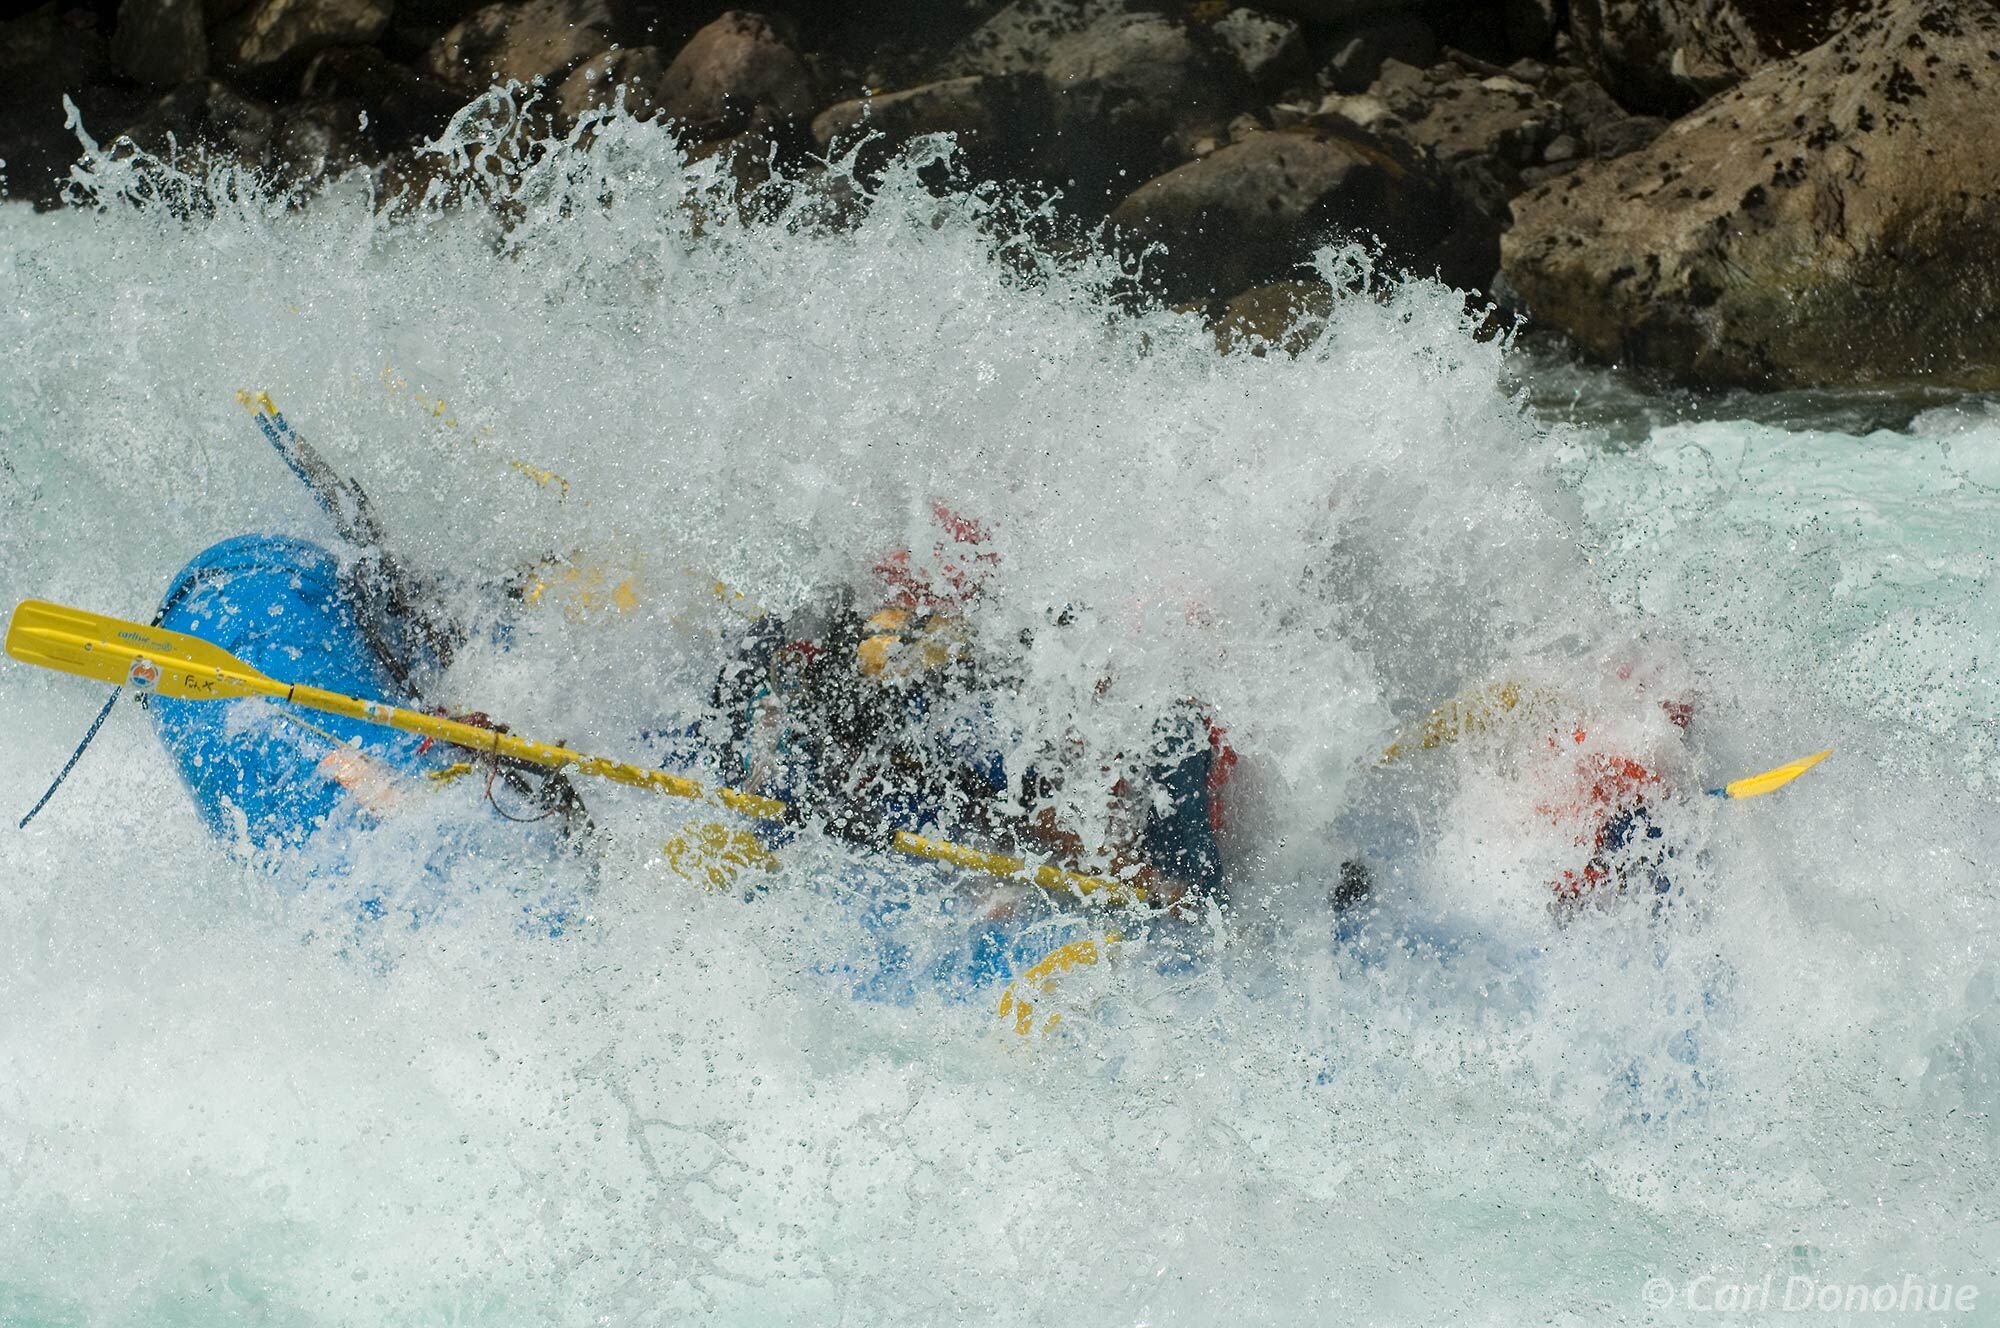 A whitewater rafting trip on the Futaleufu River plunges into the Class IV Mondaca Rapid, just outside the town of Futaleufu...